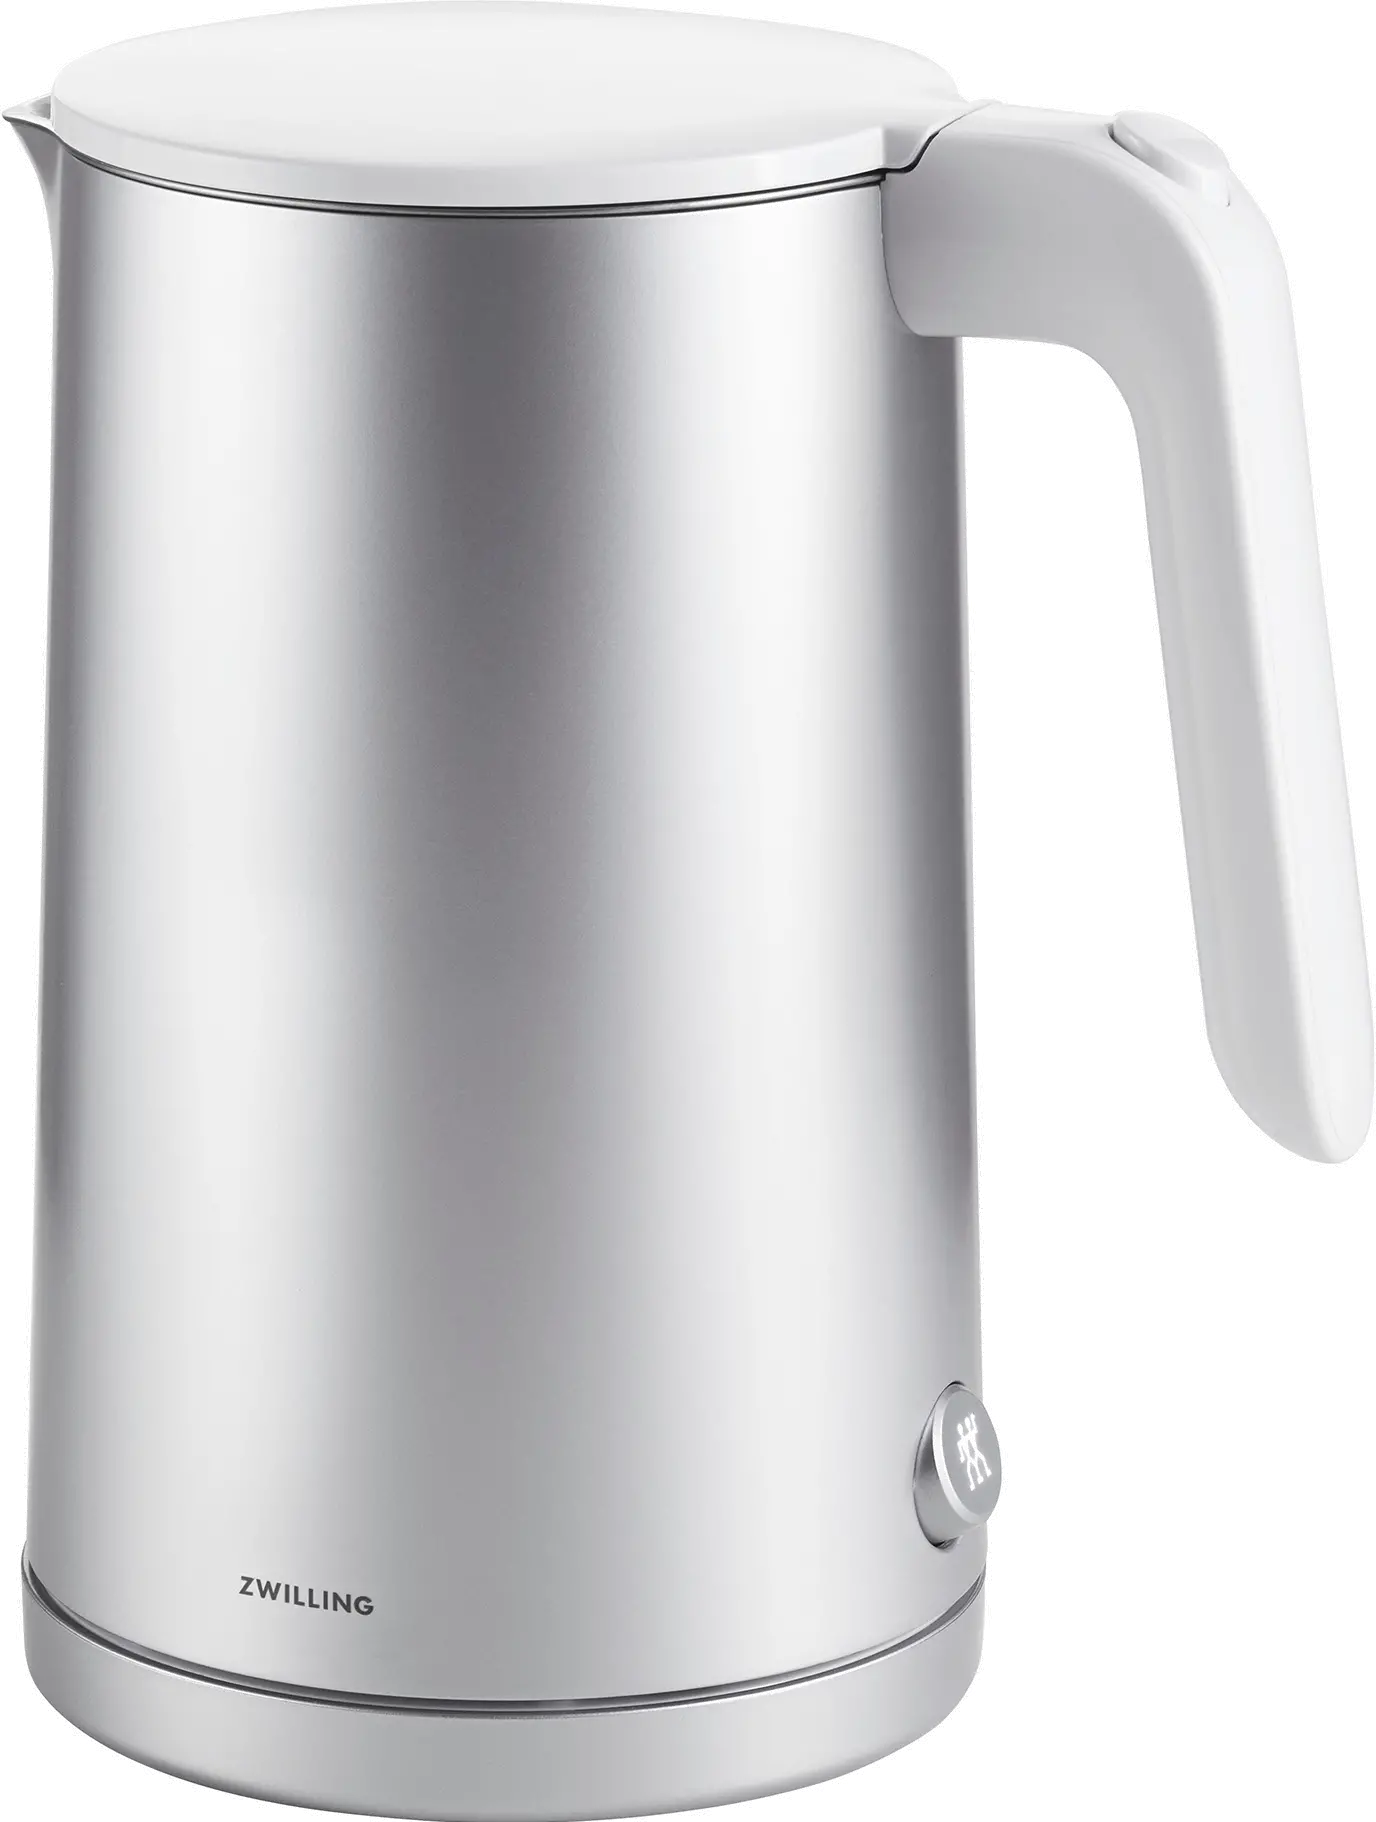 https://static.rcwilley.com/products/112935280/Zwilling-Enfinigy-Cordless-Tea-Kettle---Silver-rcwilley-image1.webp